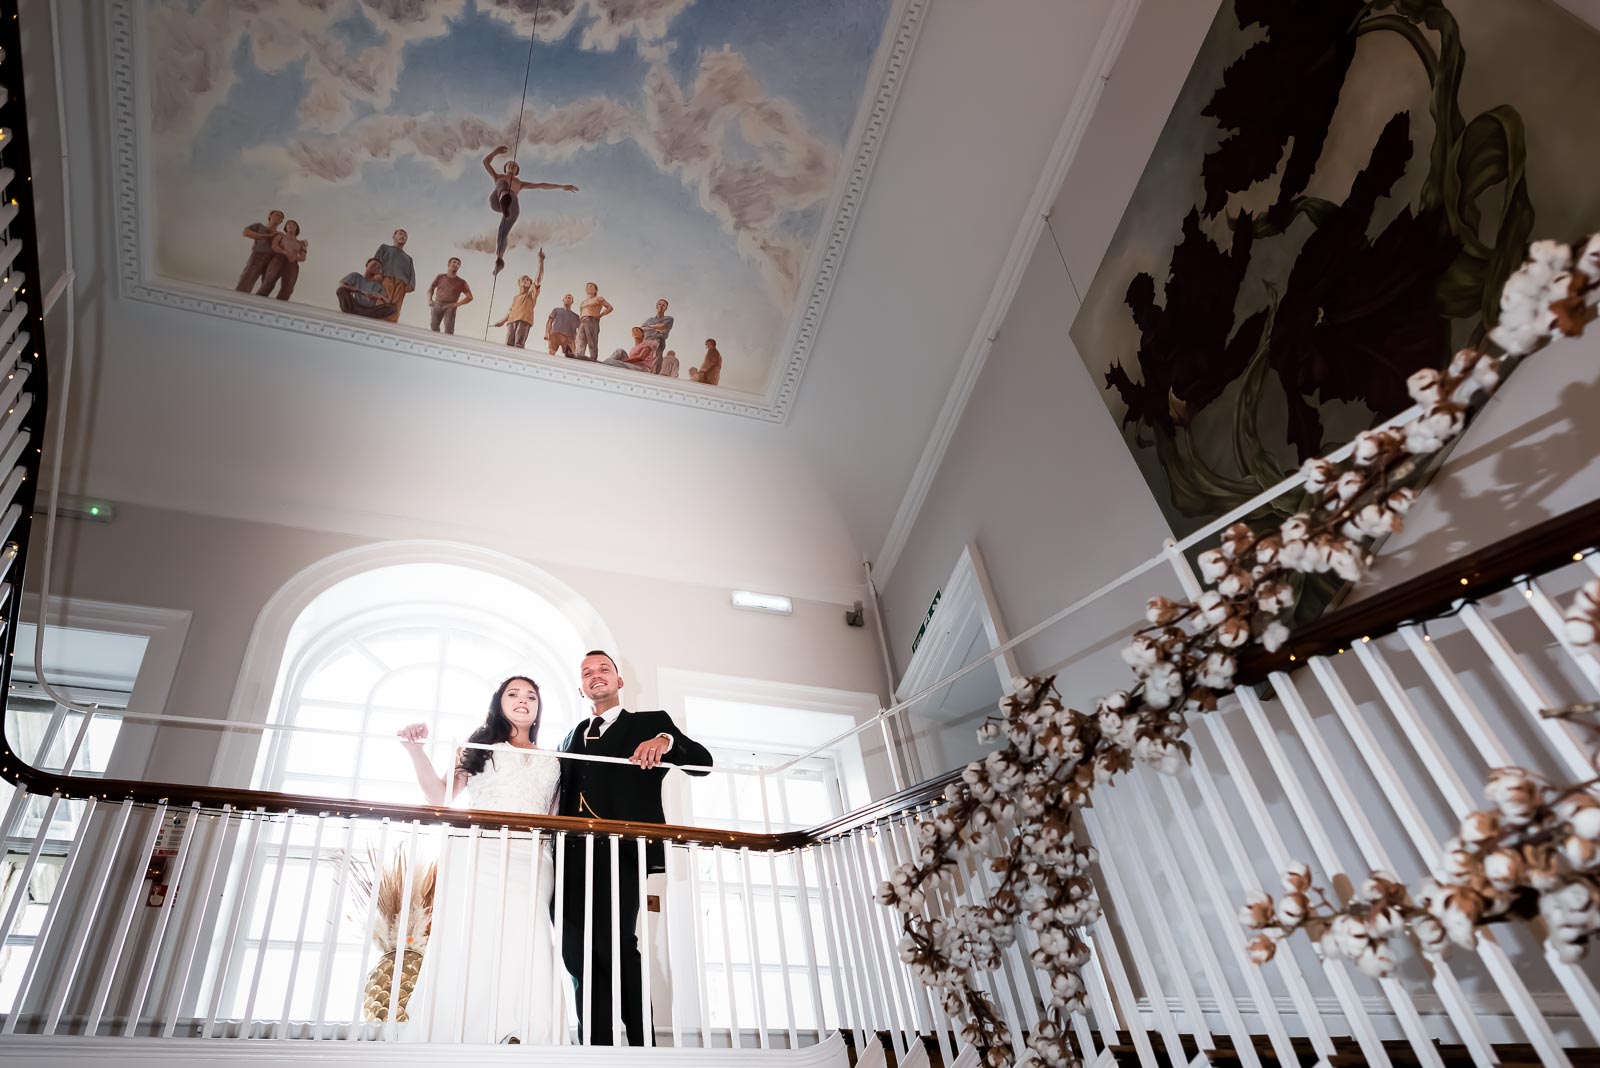 Natalie and Dean pose at the top of the stairs in Pelham House Hotel, Lewes after their wedding.